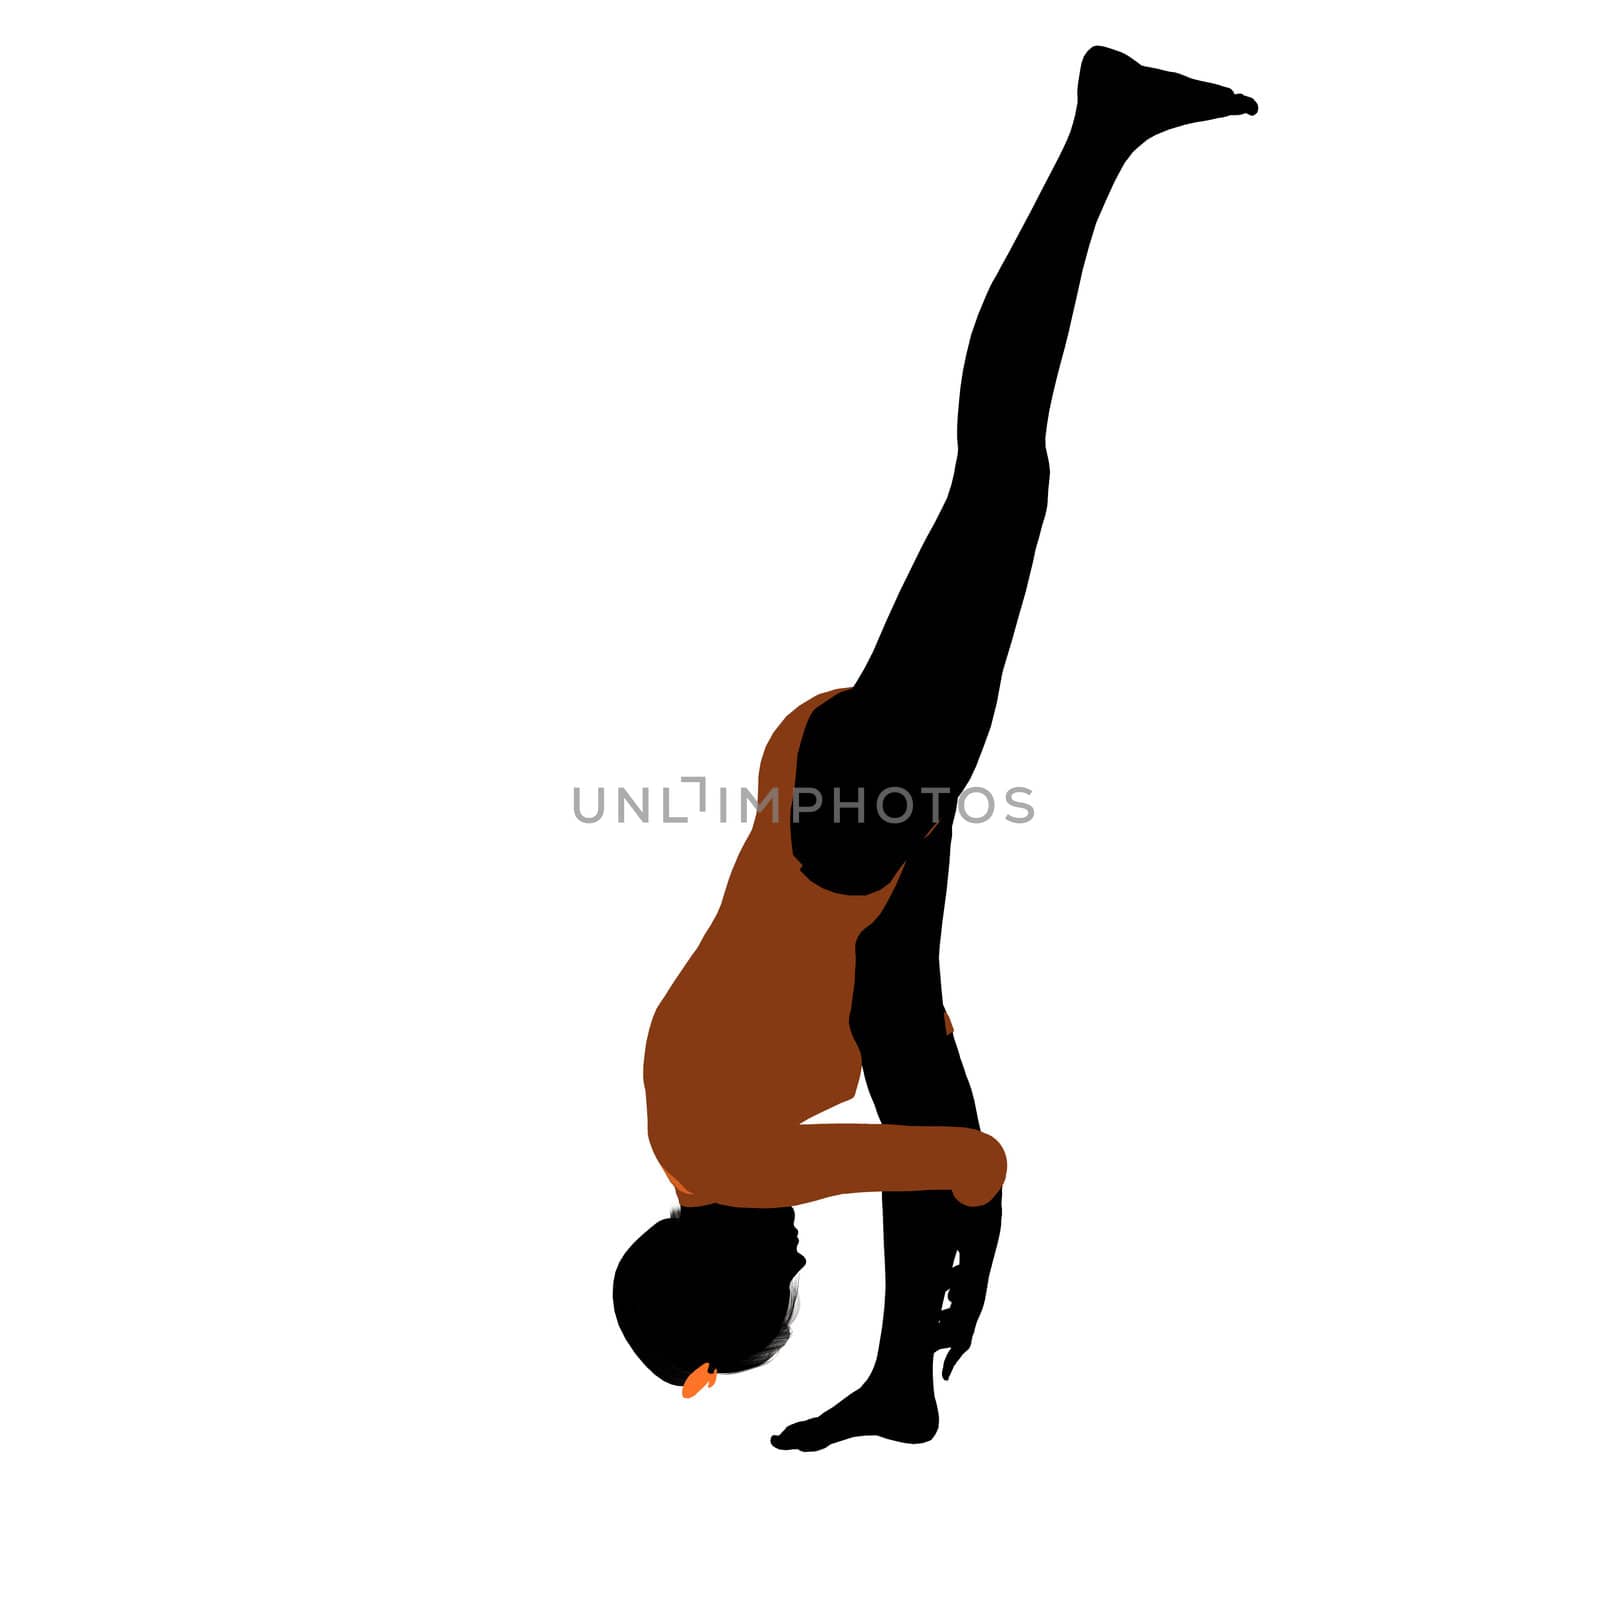 Female gymnast art illustration silhouette on a white background